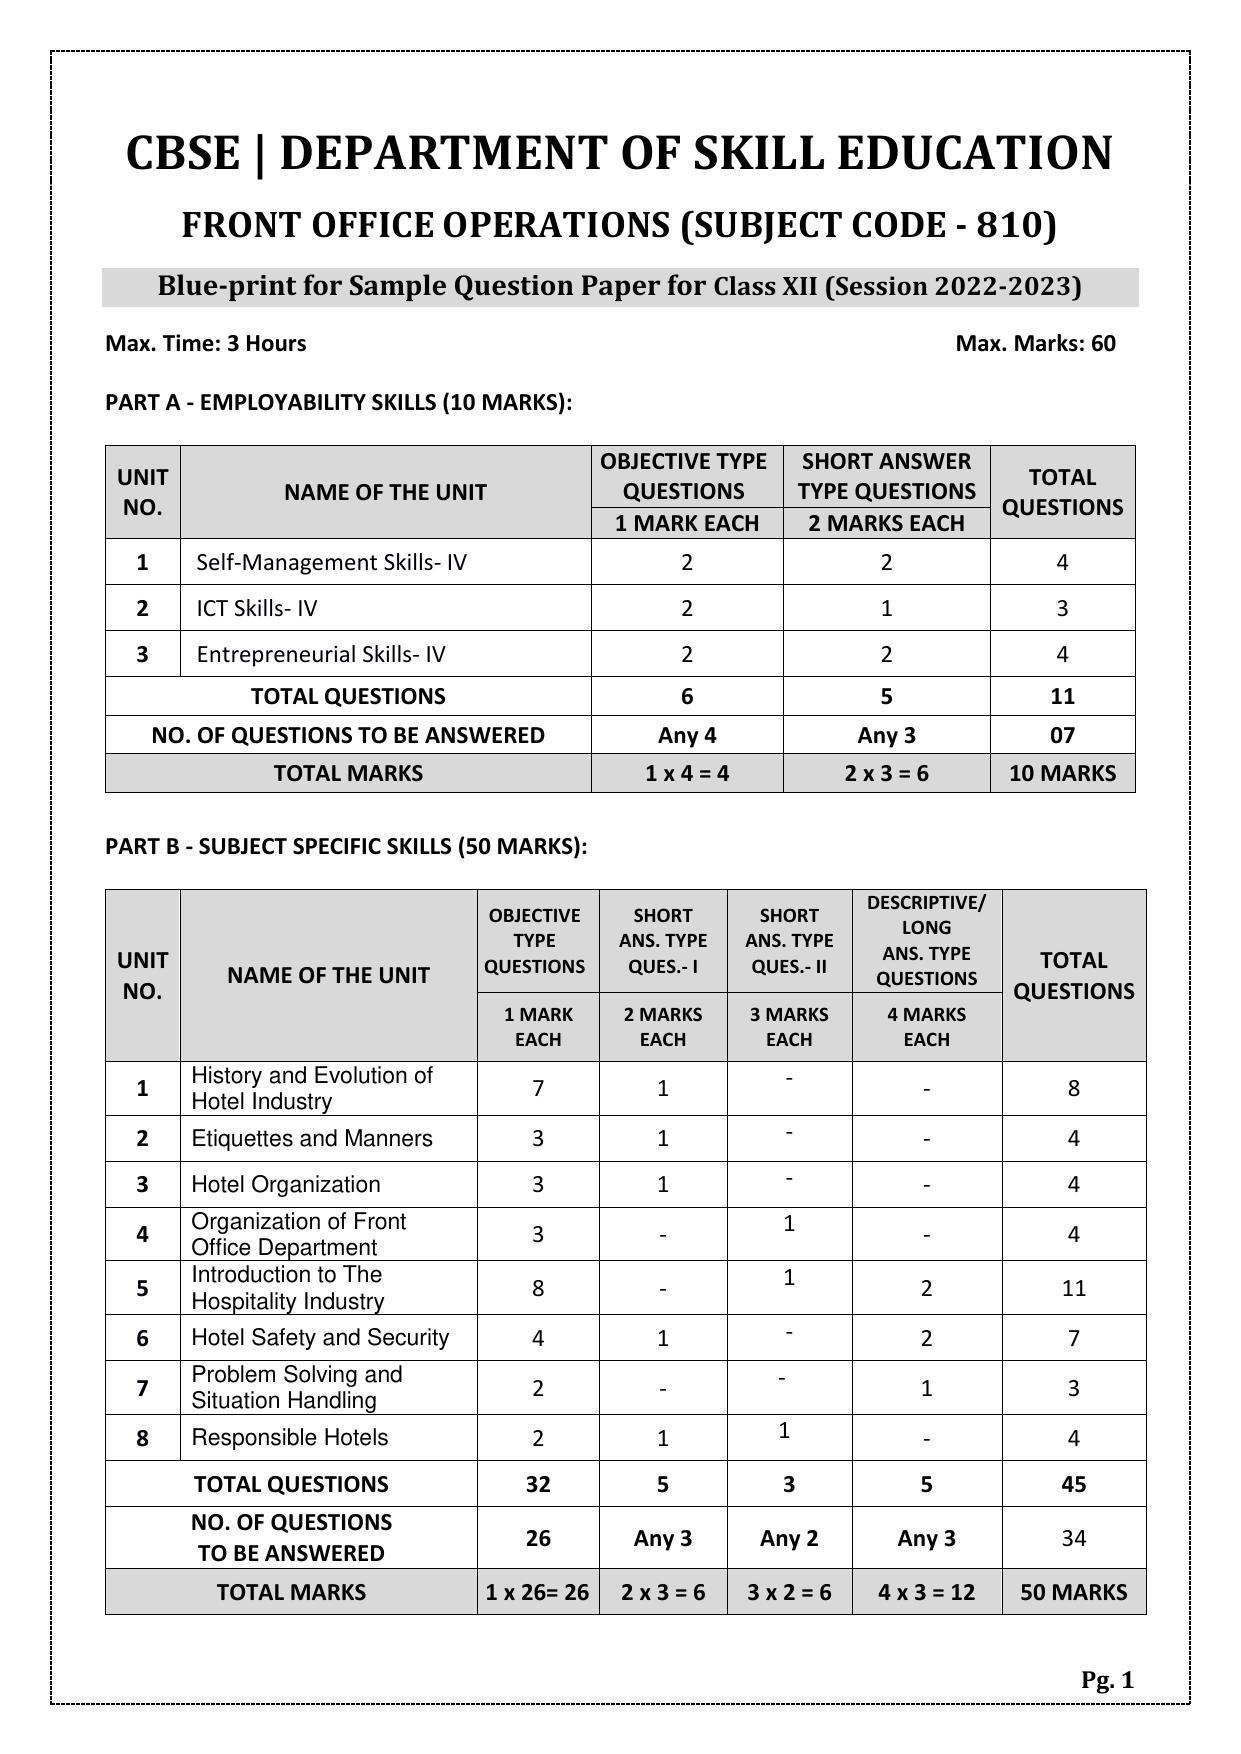 CBSE Class 12 Front Office Operations (Skill Education) Sample Papers 2023 - Page 1